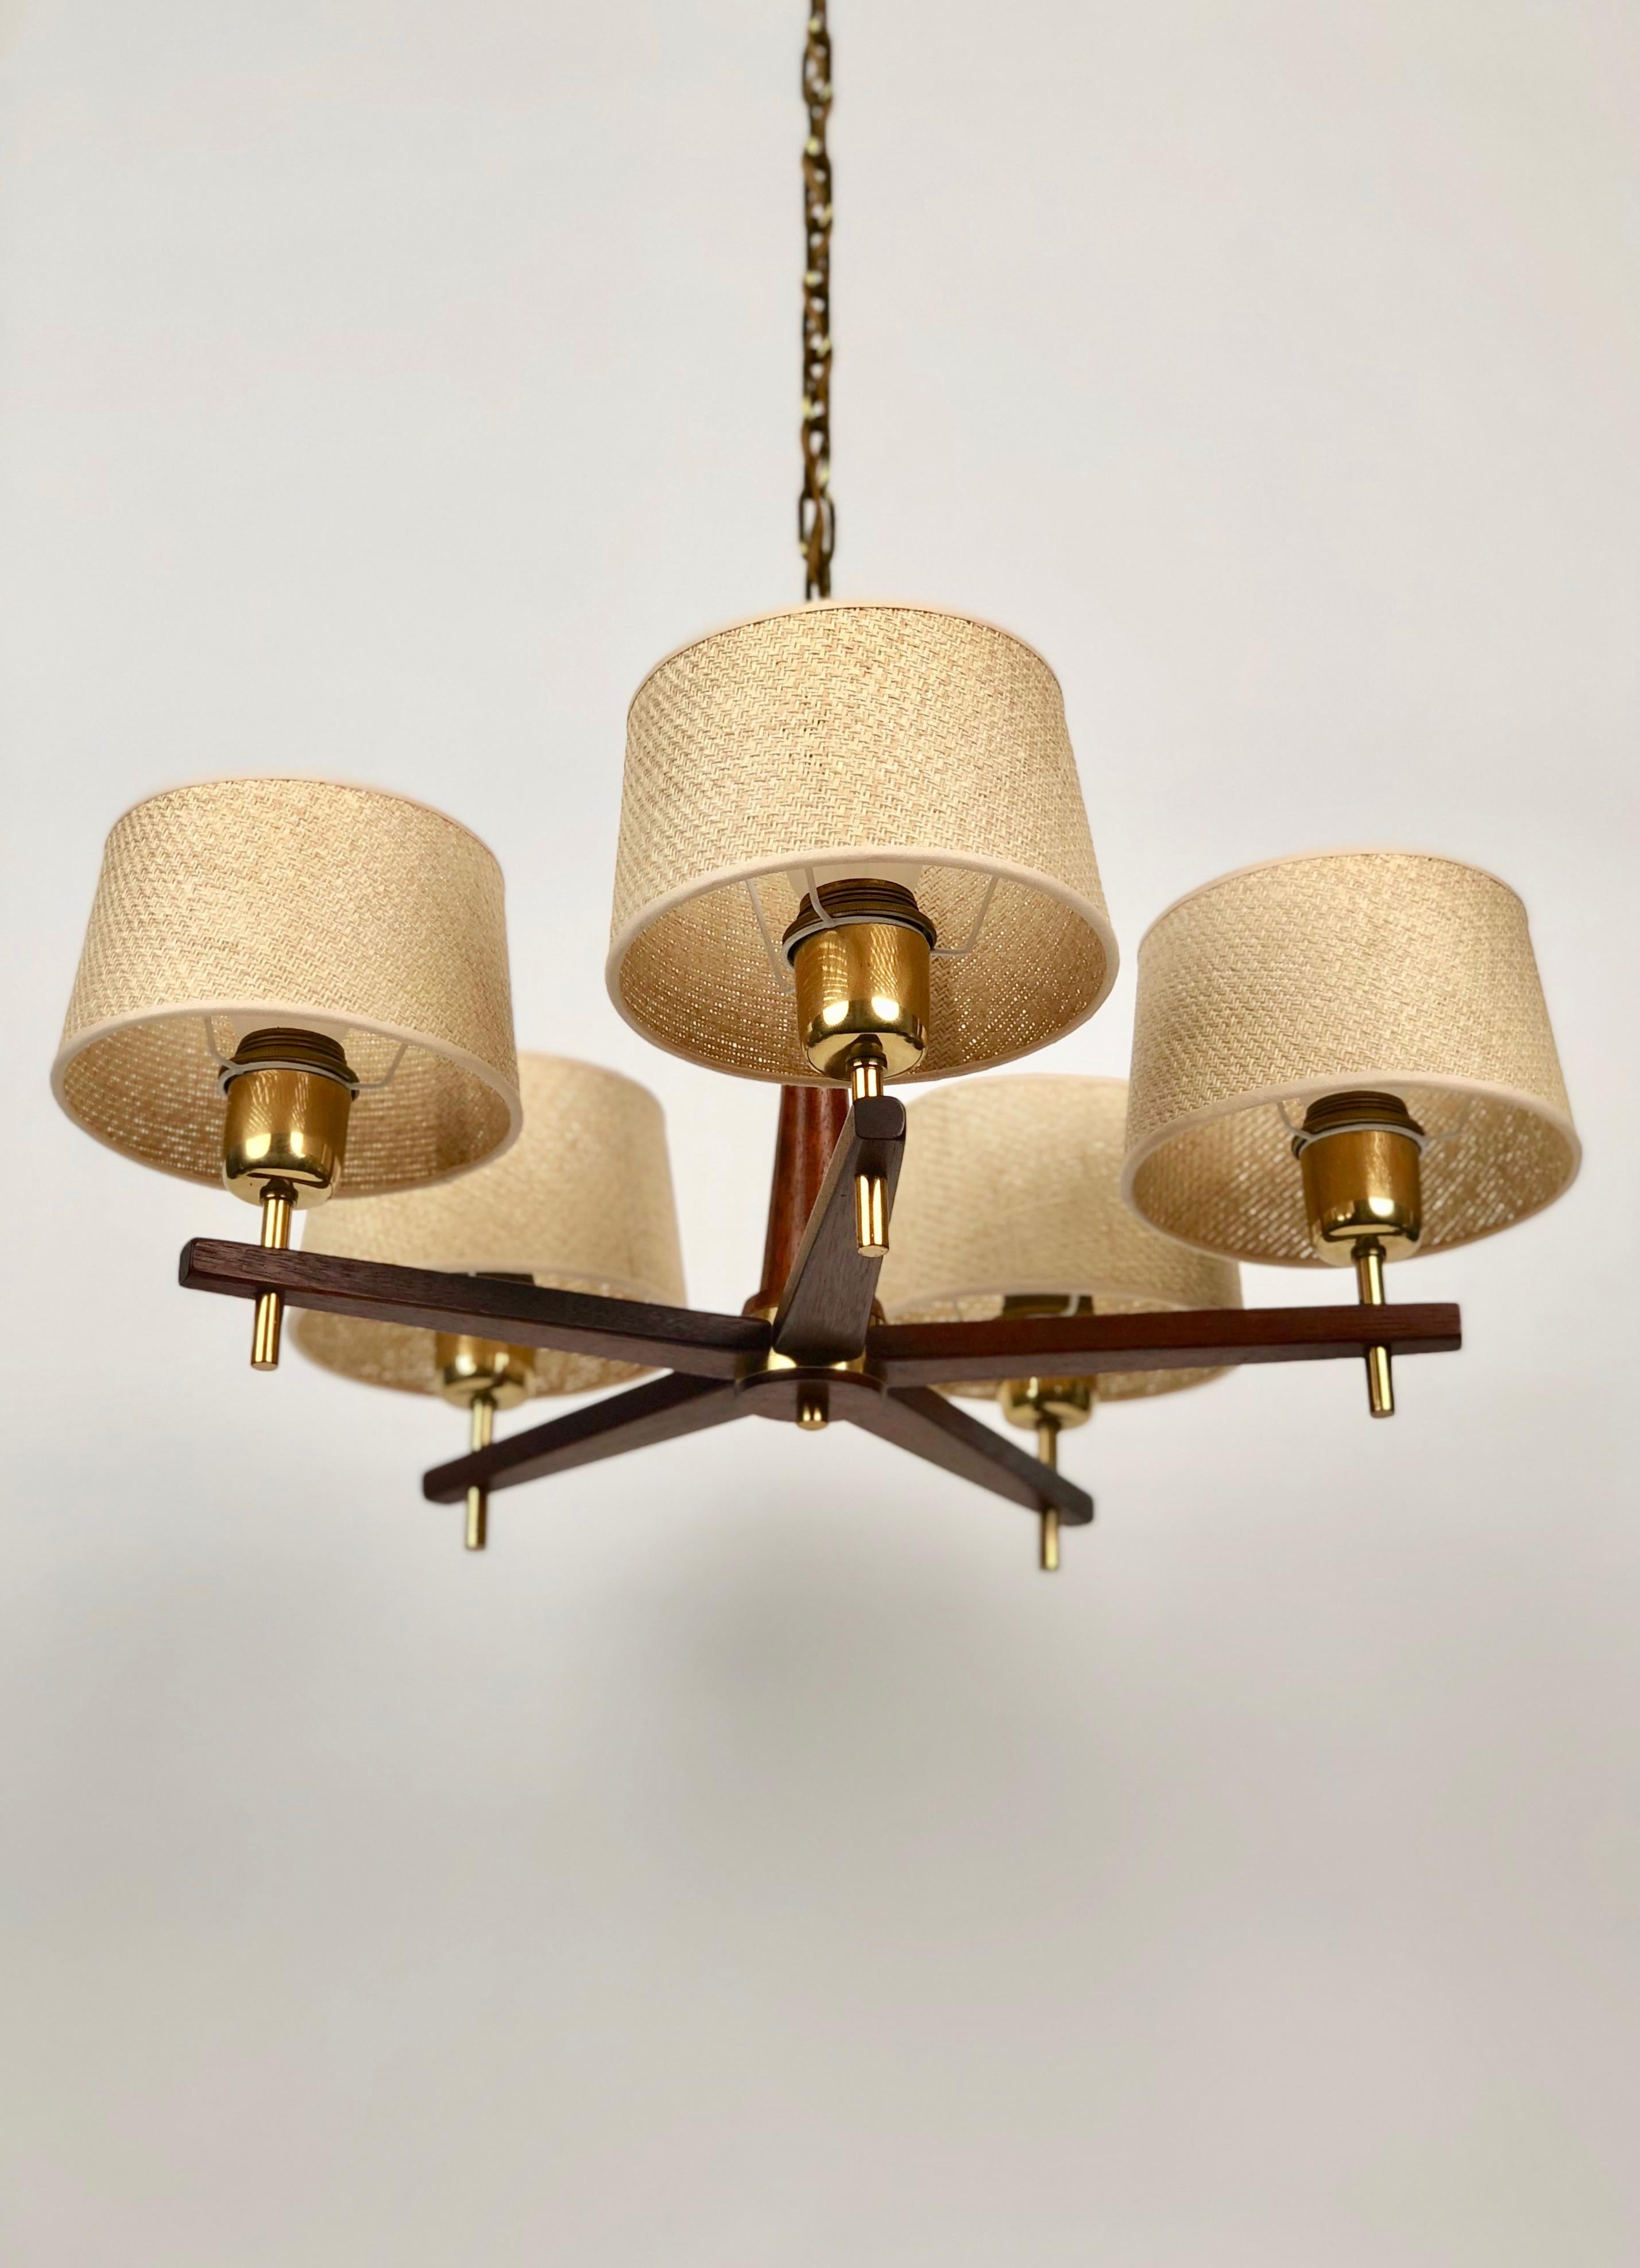 Mid-Century Modern Five Arms Chandelier in Teak Wood and Brass with Cane Shades, 1960, Austria For Sale